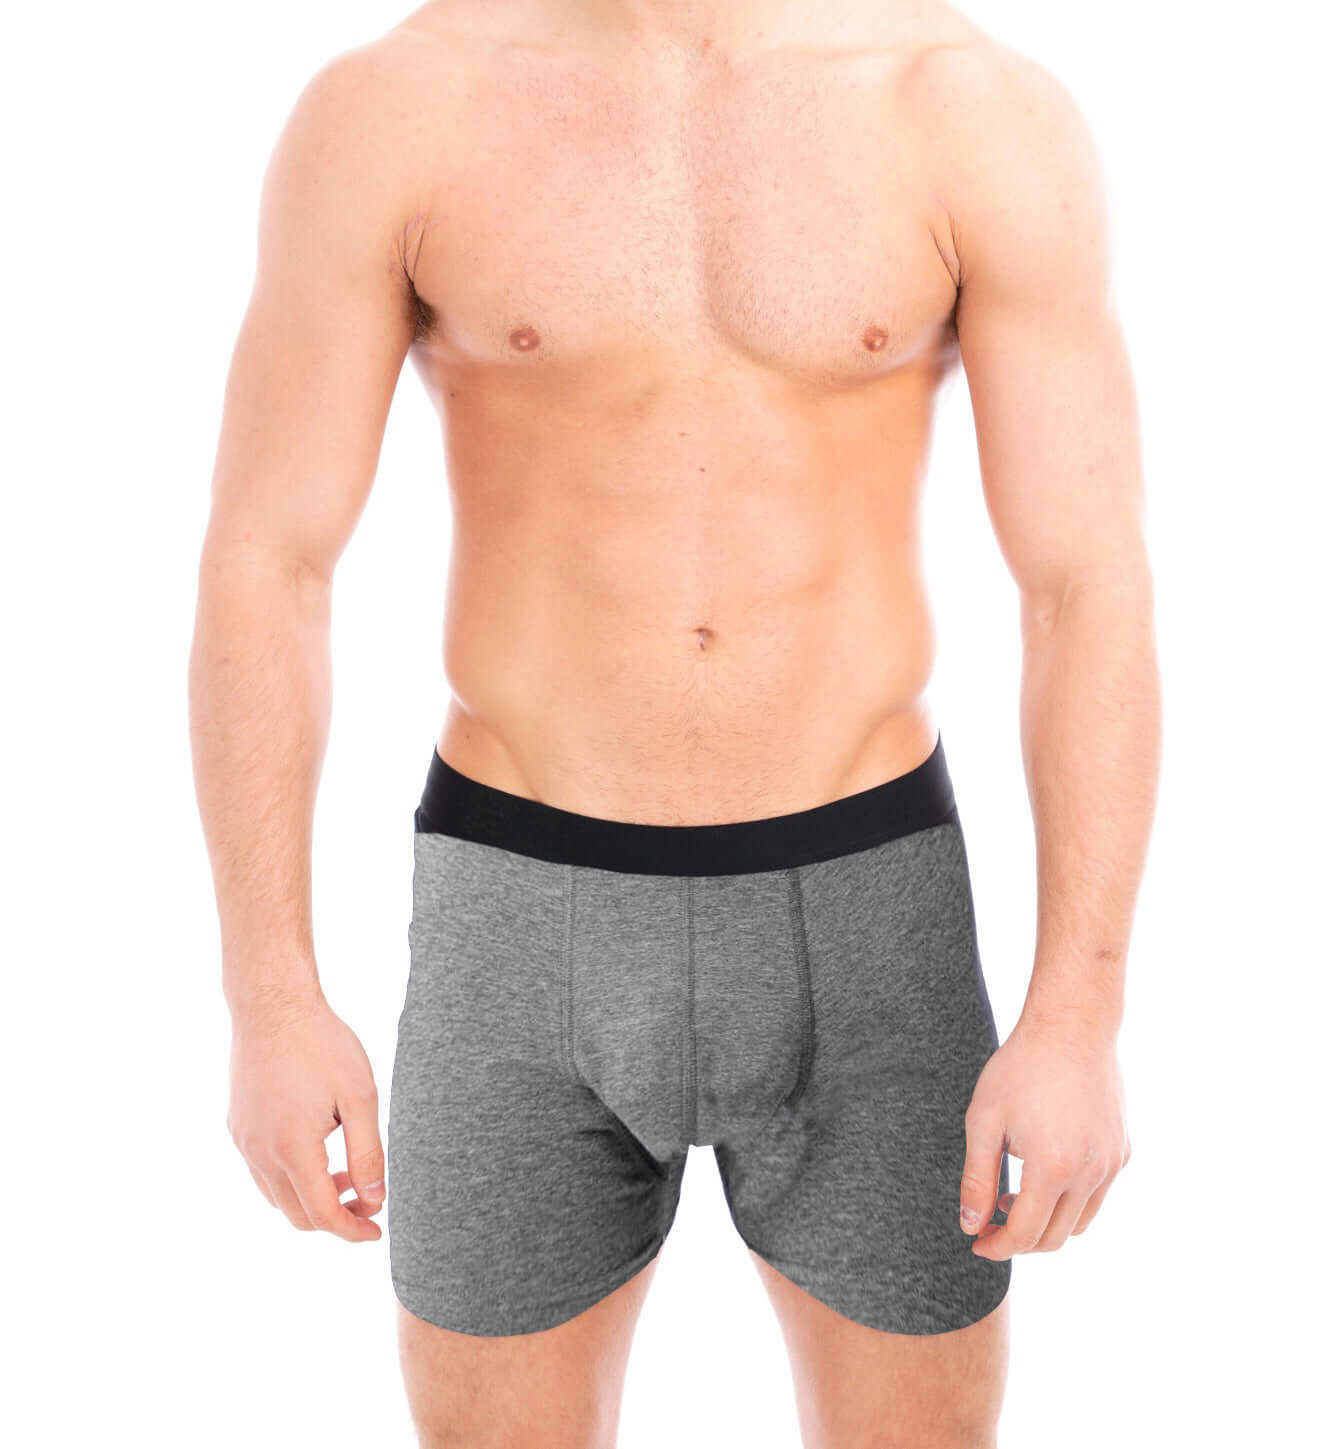 Pack Of 6 Men's Cotton Boxers, Comfort Fit Boxershorts, Performance Underwear (MB03/04). Buy now for £8.00. A Boxer Shorts by Sock Stack. black, boxer shorts, breathable, classic boxers, comfortable, cotton, grey, lycra, marl grey, mens, navy, Out of stoc